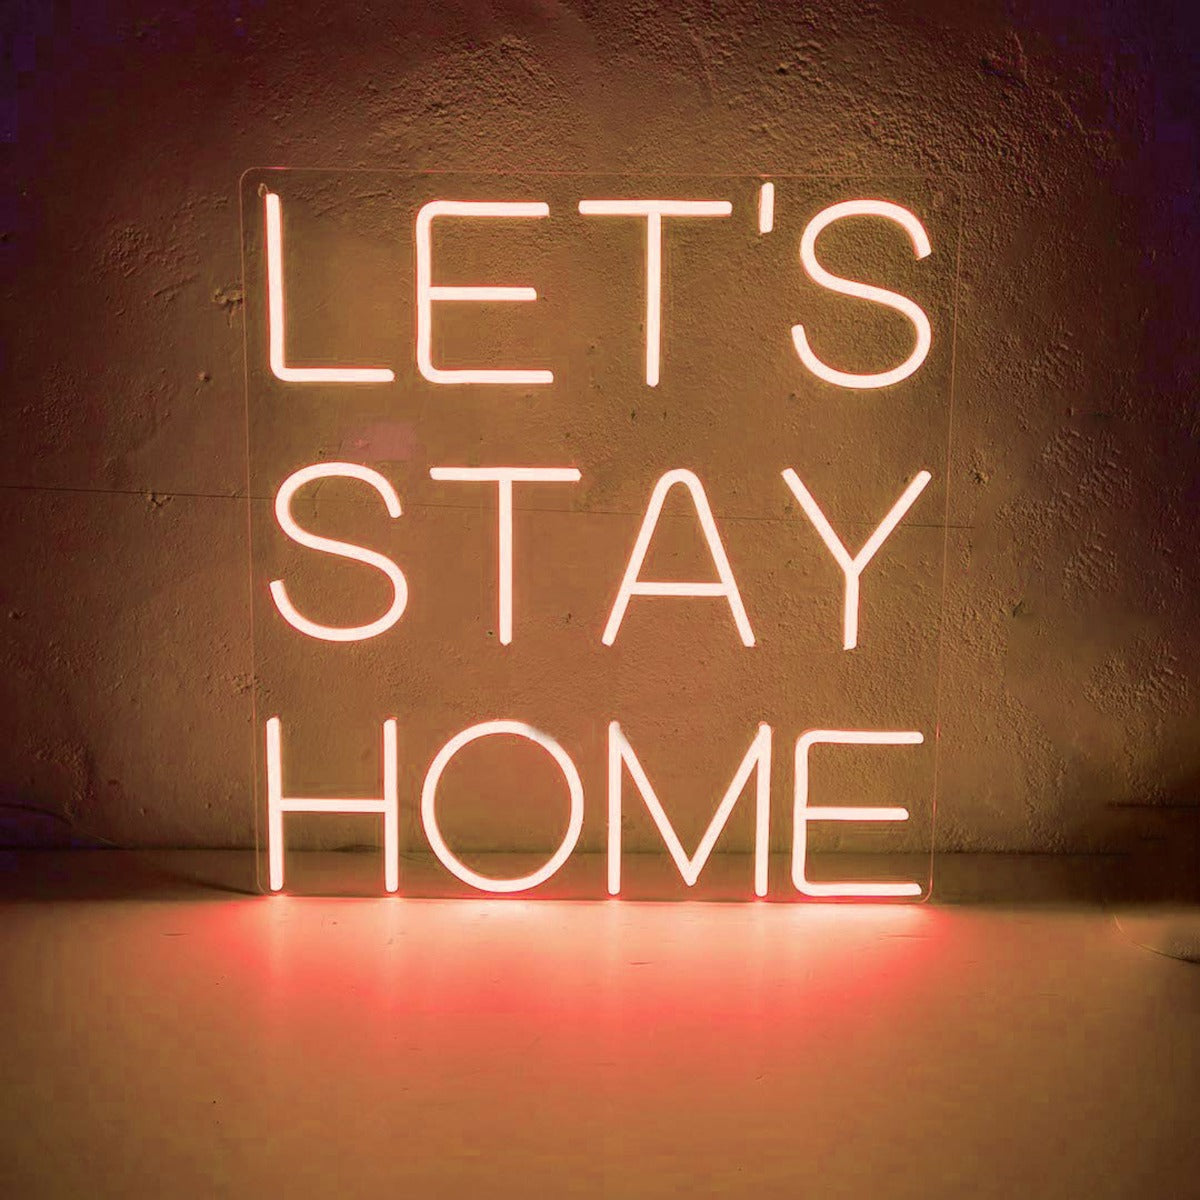 LETS STAY HOME Neon Sign Family Room Wall Hanging Decoration Neon Lighting